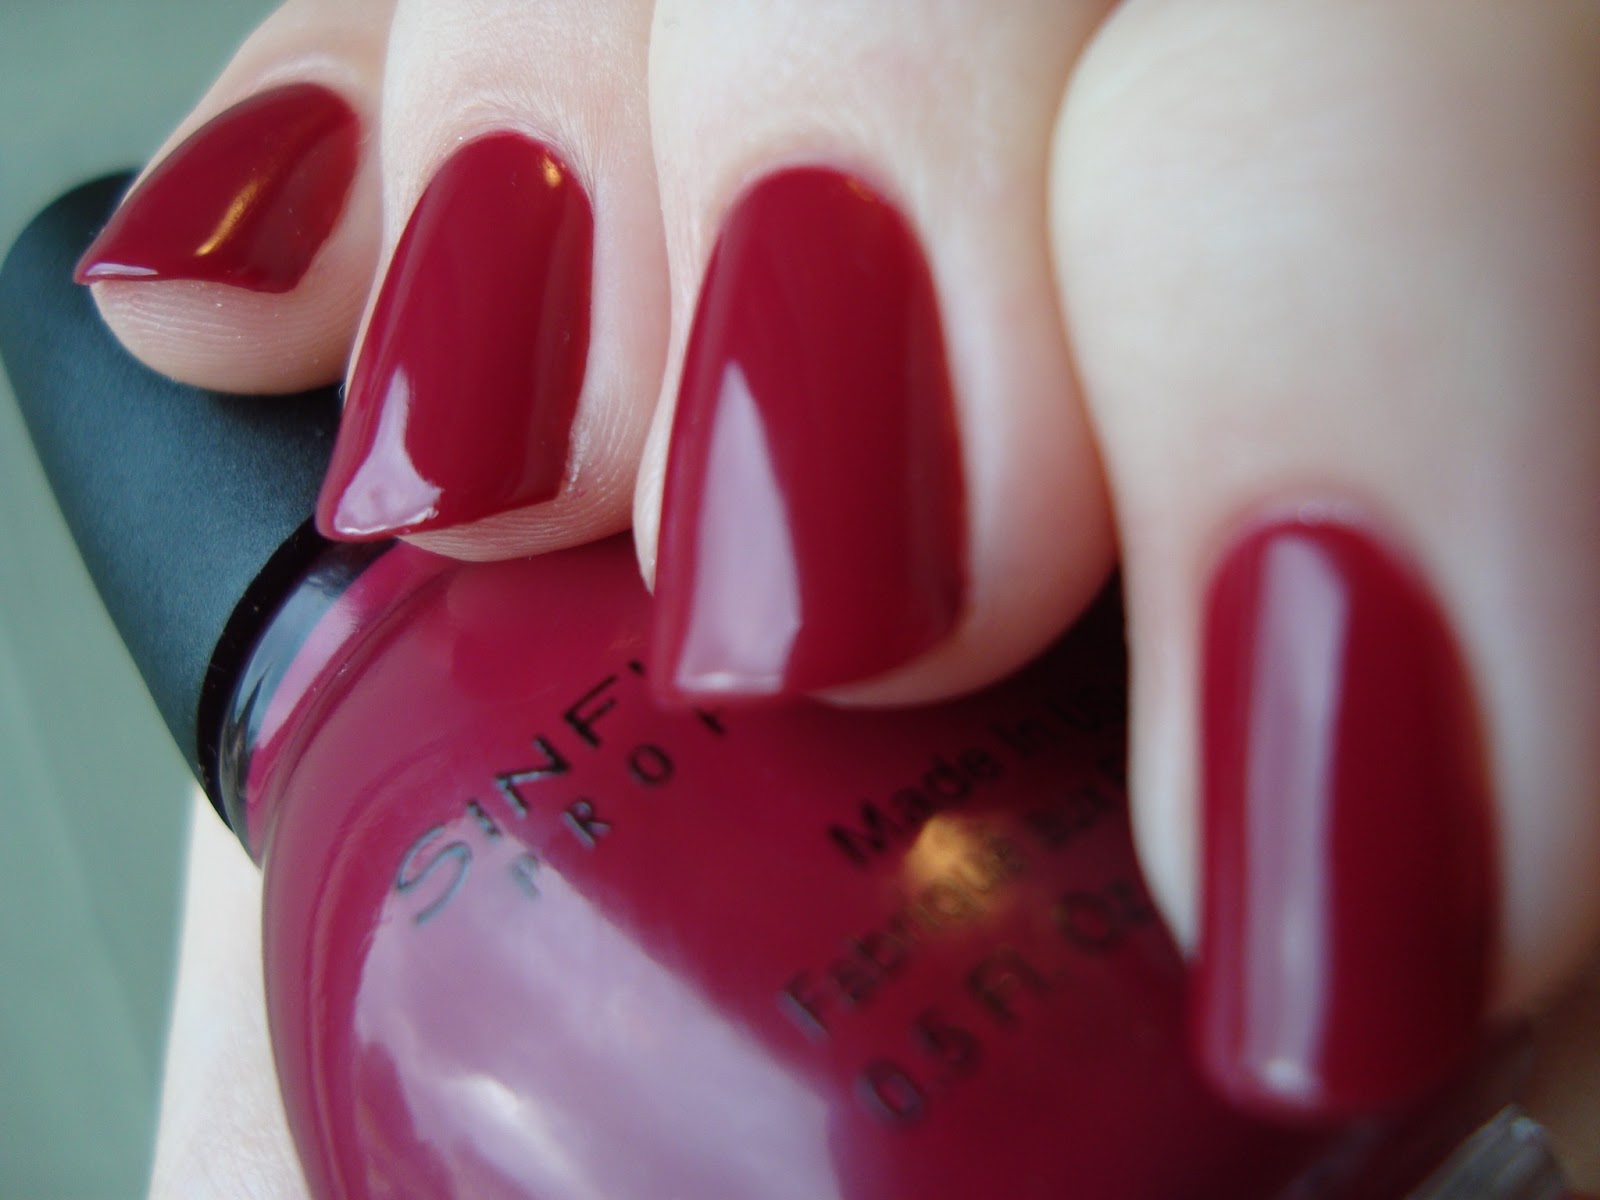 6. Sinful Colors Aubergine Professional Nail Polish - wide 6